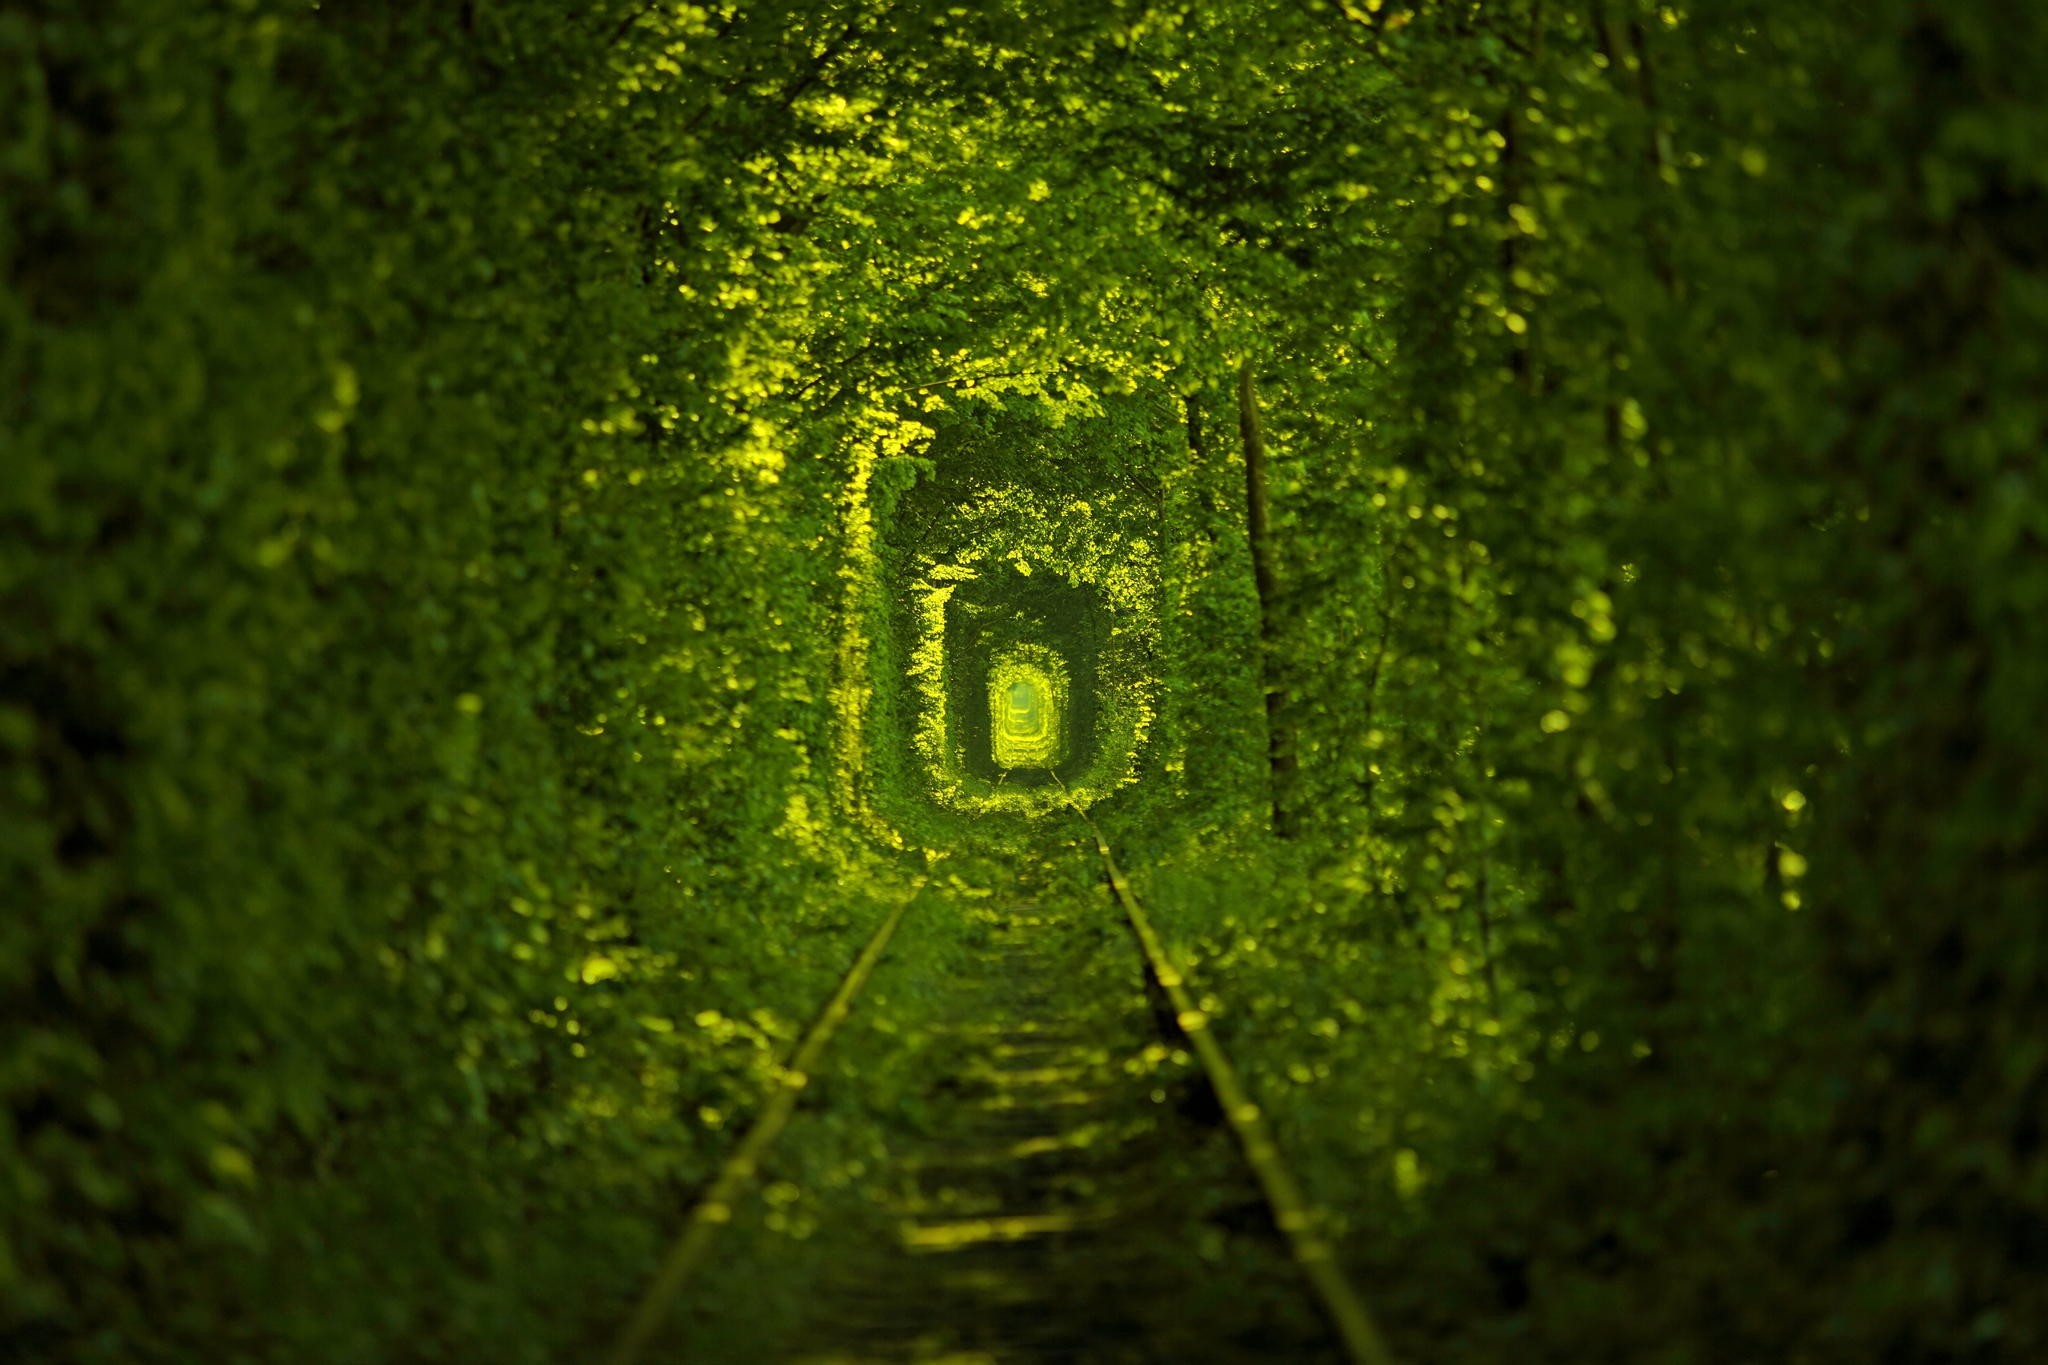 General 2048x1365 nature railway trees green leaves tunnel Tunnel of Love tunnel of trees sunlight